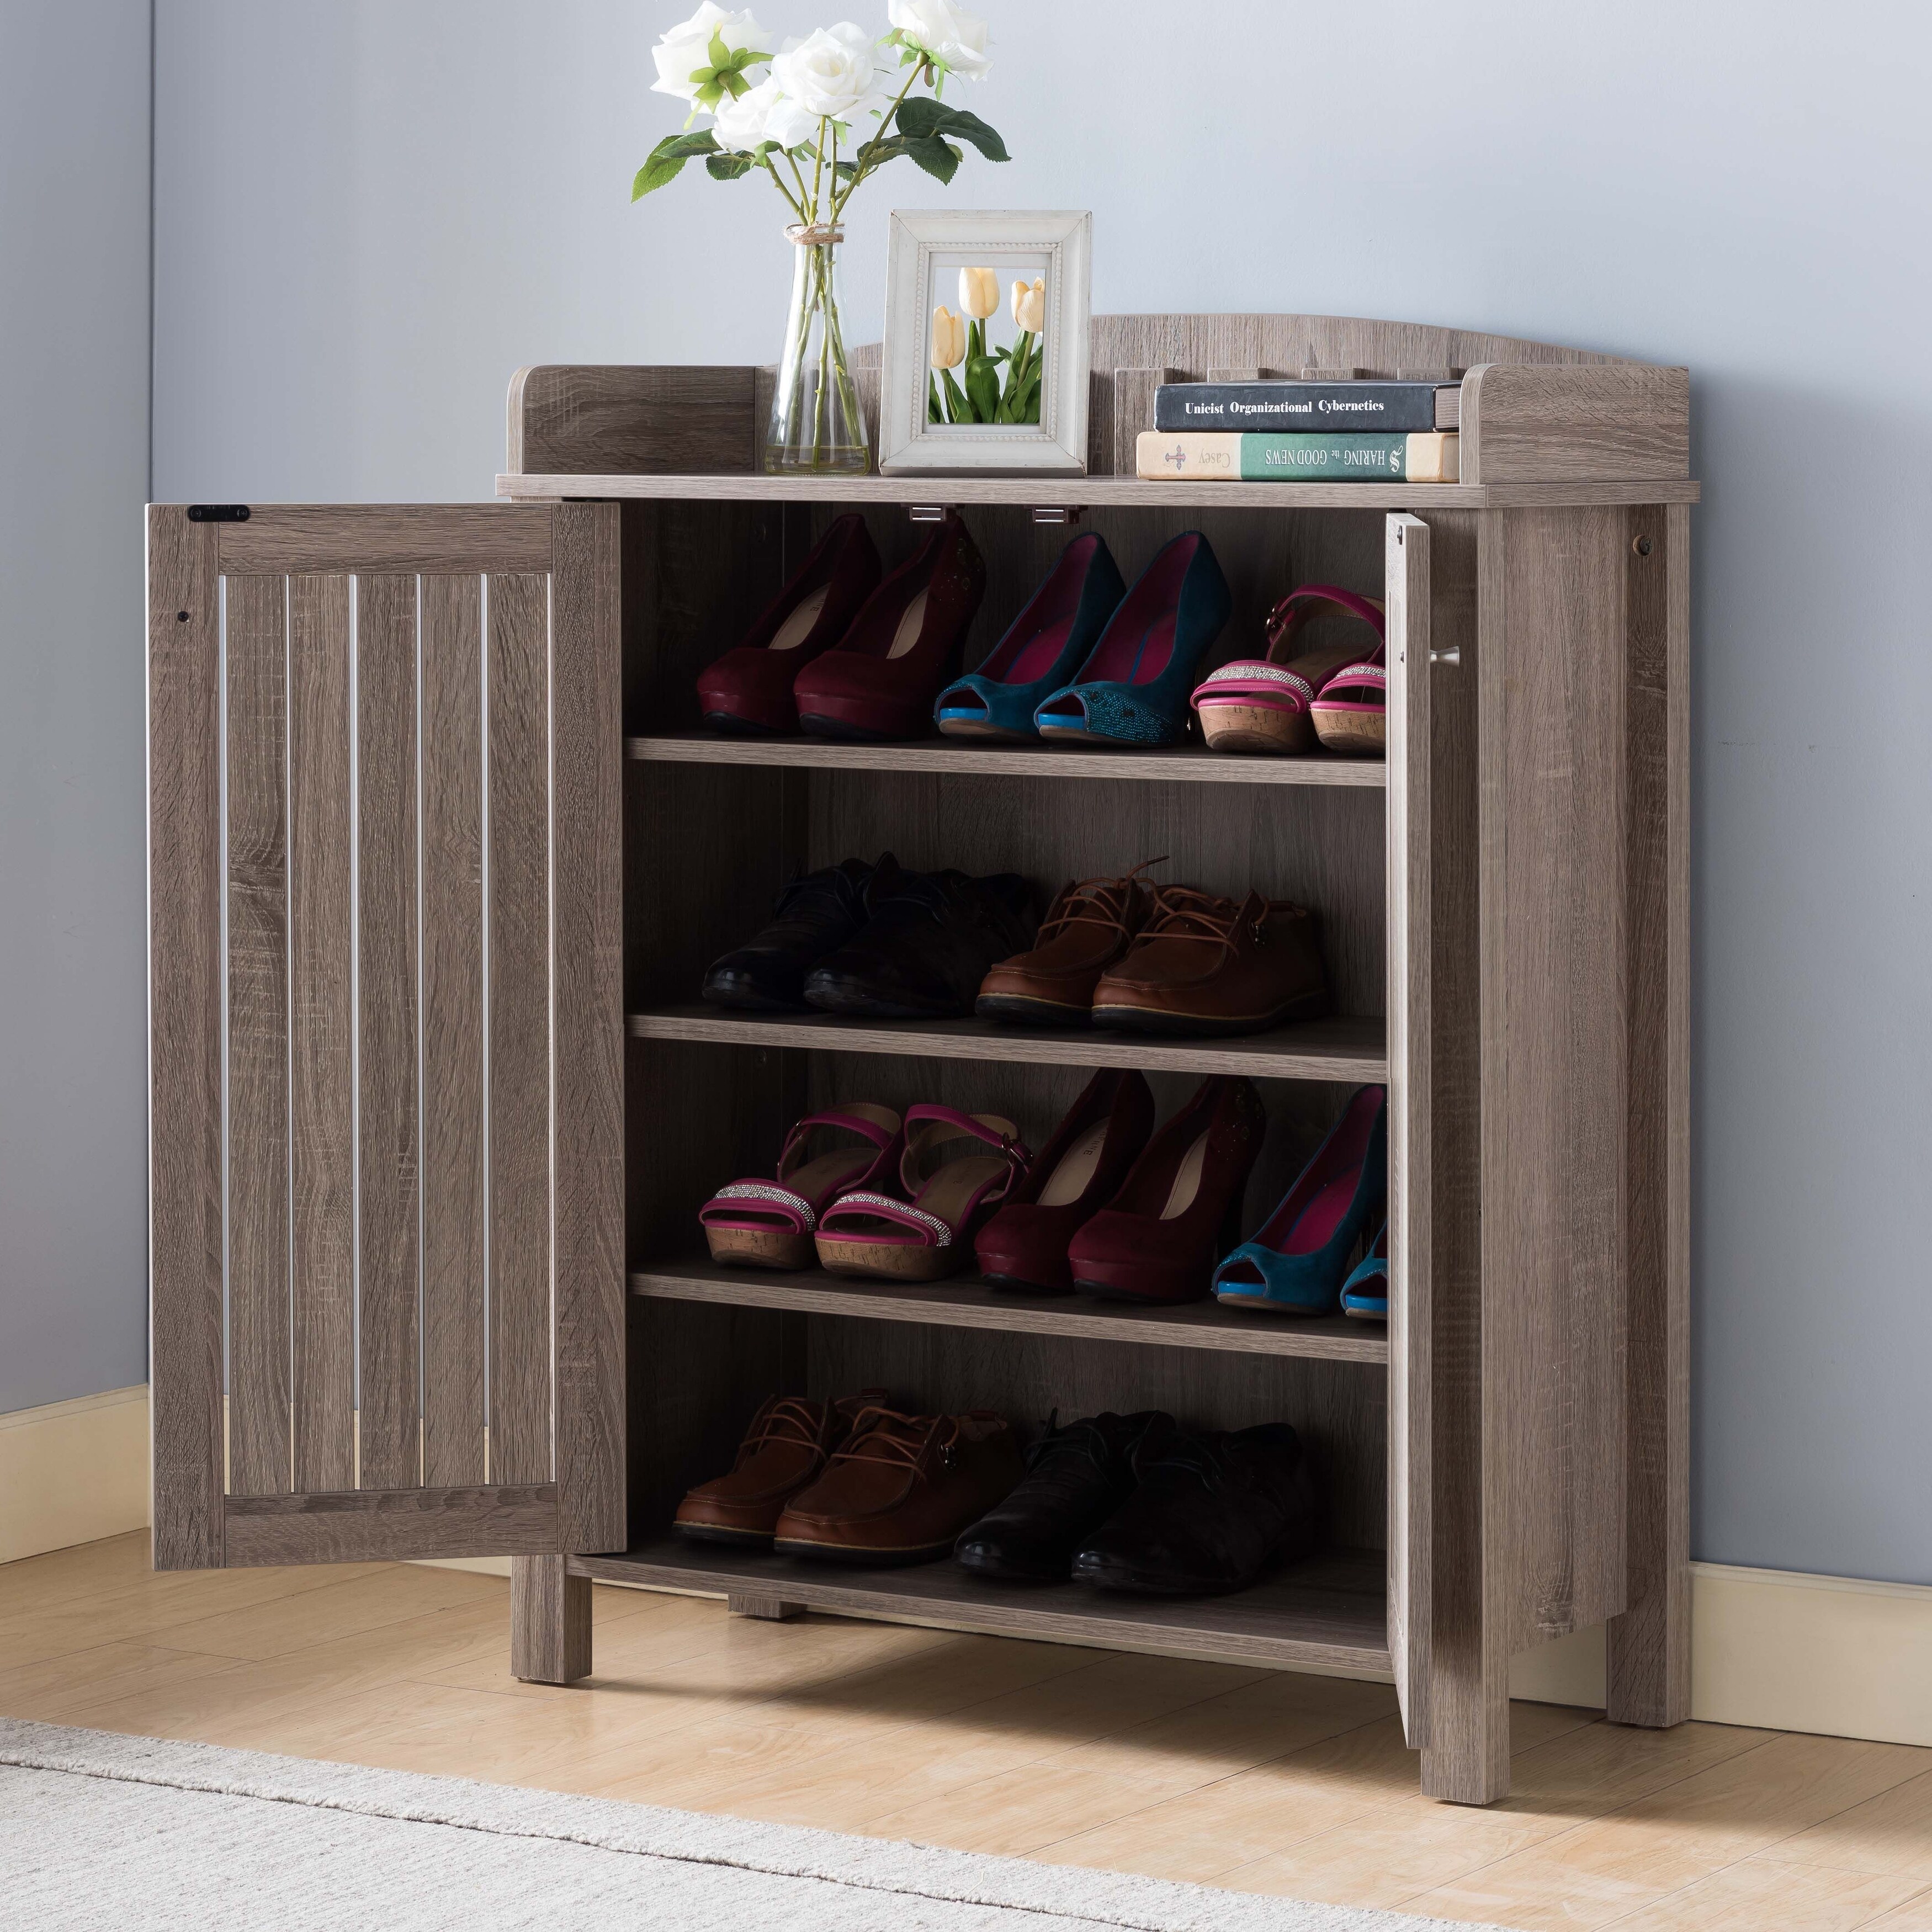 https://ak1.ostkcdn.com/images/products/is/images/direct/37611f755f13f0a22daa08bc9440c6f8c68a5425/Q-Max-Shoe-Cabinet-Featuring-a-Two-Door-Cabinet-with-Four-Shelves-Fit-for-15-Pairs-of-Shoes-finished-in-Dark-Taupe.jpg